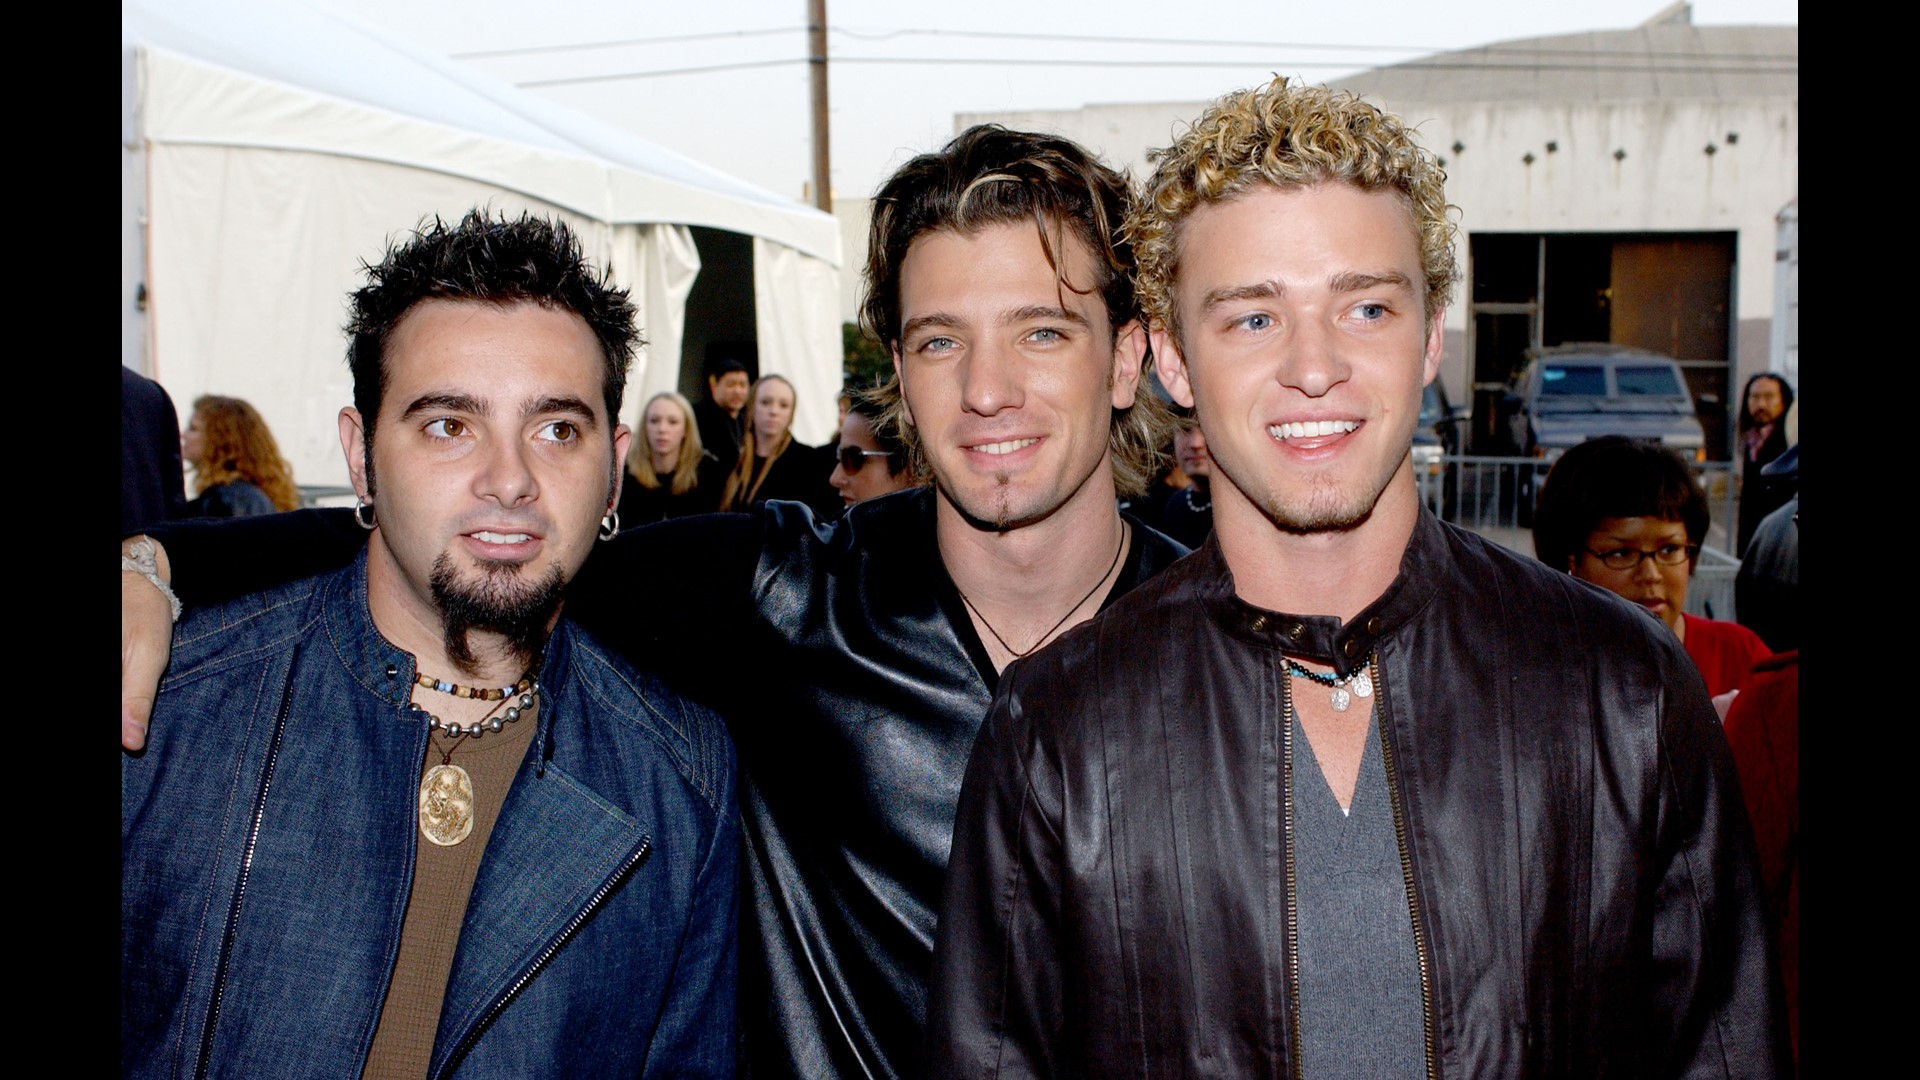 The event will feature nostalgic pop artists Chris Kirkpatrick of NSYNC, LFO, O’TOWN, and Jeff Timmons of 98 Degrees.